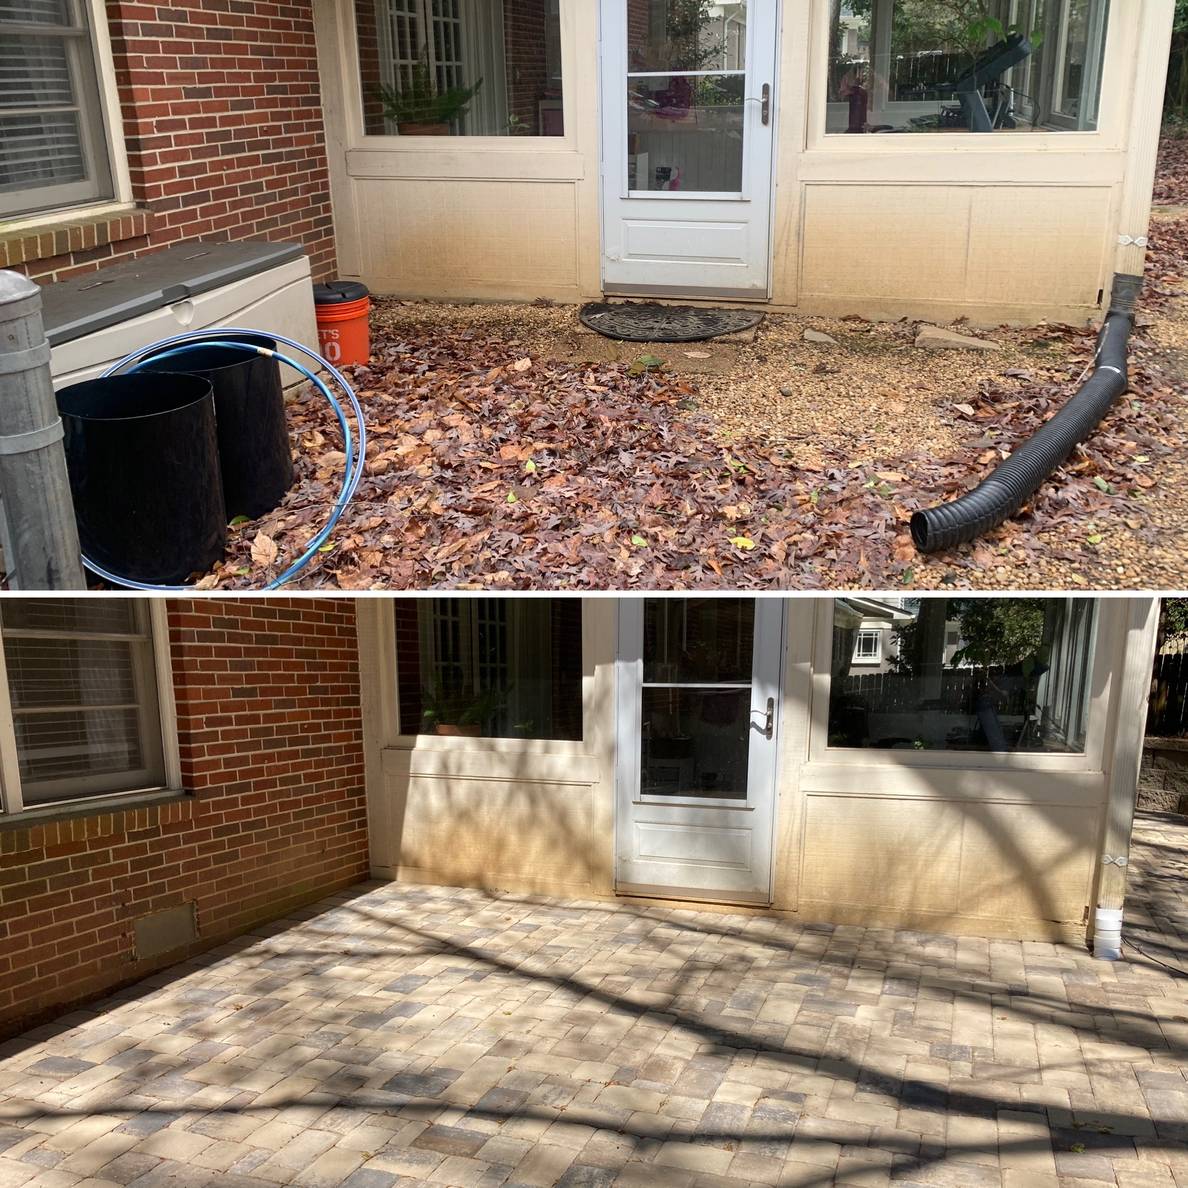 Before and after photos of an outdoor space with a sun porch in the background. In the Before photo, the foreground is a leafy cluttered mess. In the After photo, the foreground is a cleared paver patio.